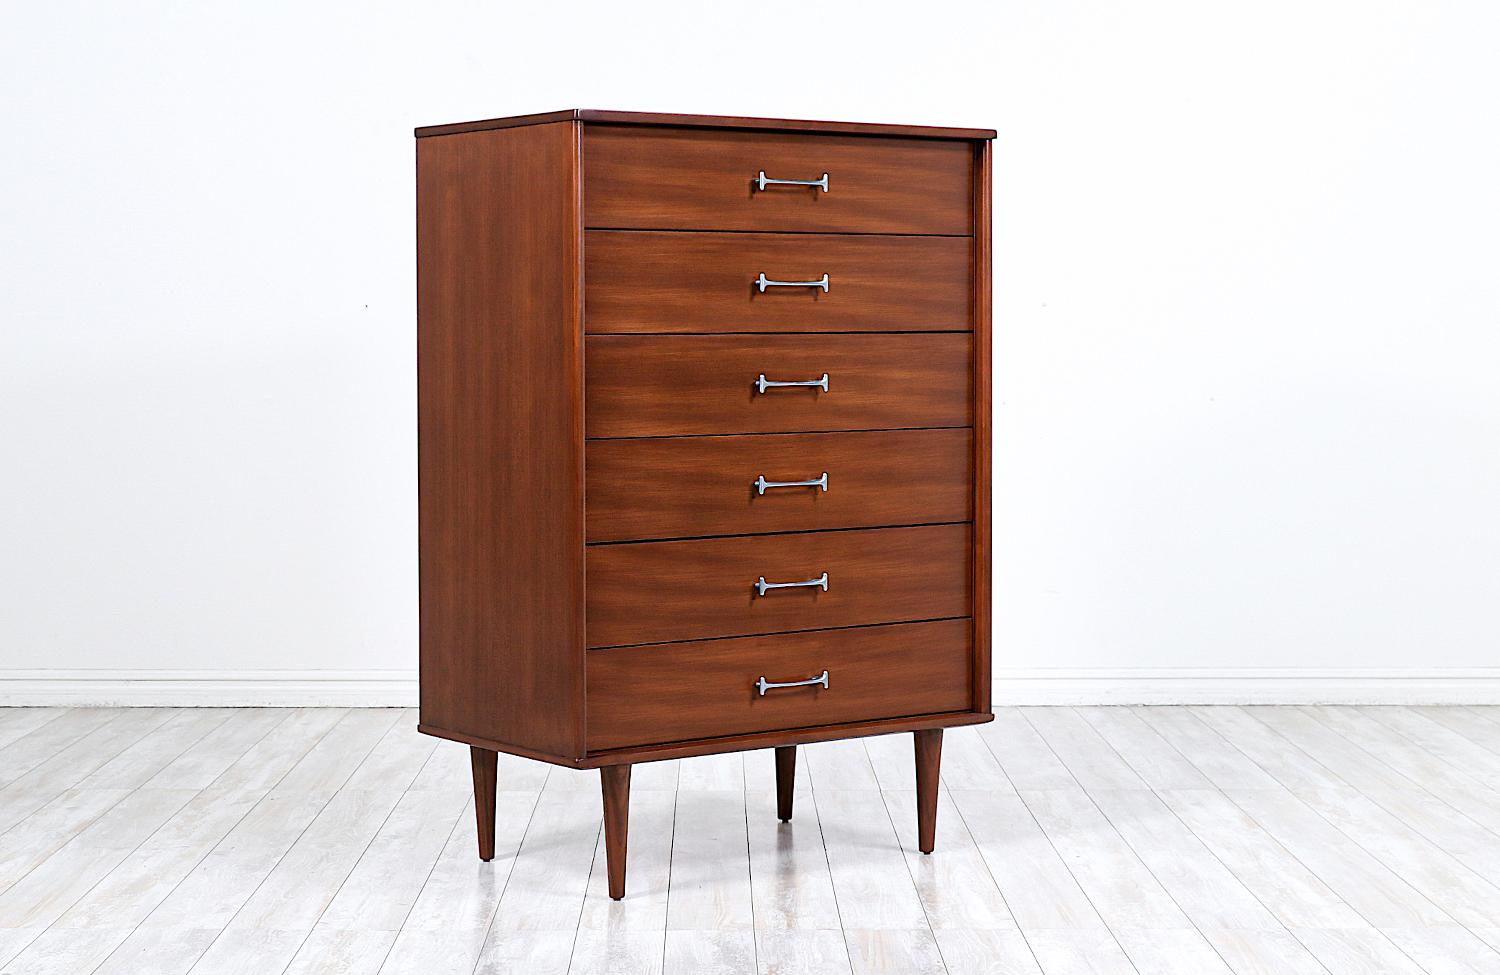 Chest of drawers with chrome handles by Drexel, from the New Today's Living Collection.

________________________________________________________________

Transforming a piece of Mid-Century Modern furniture is like bringing history back to life,